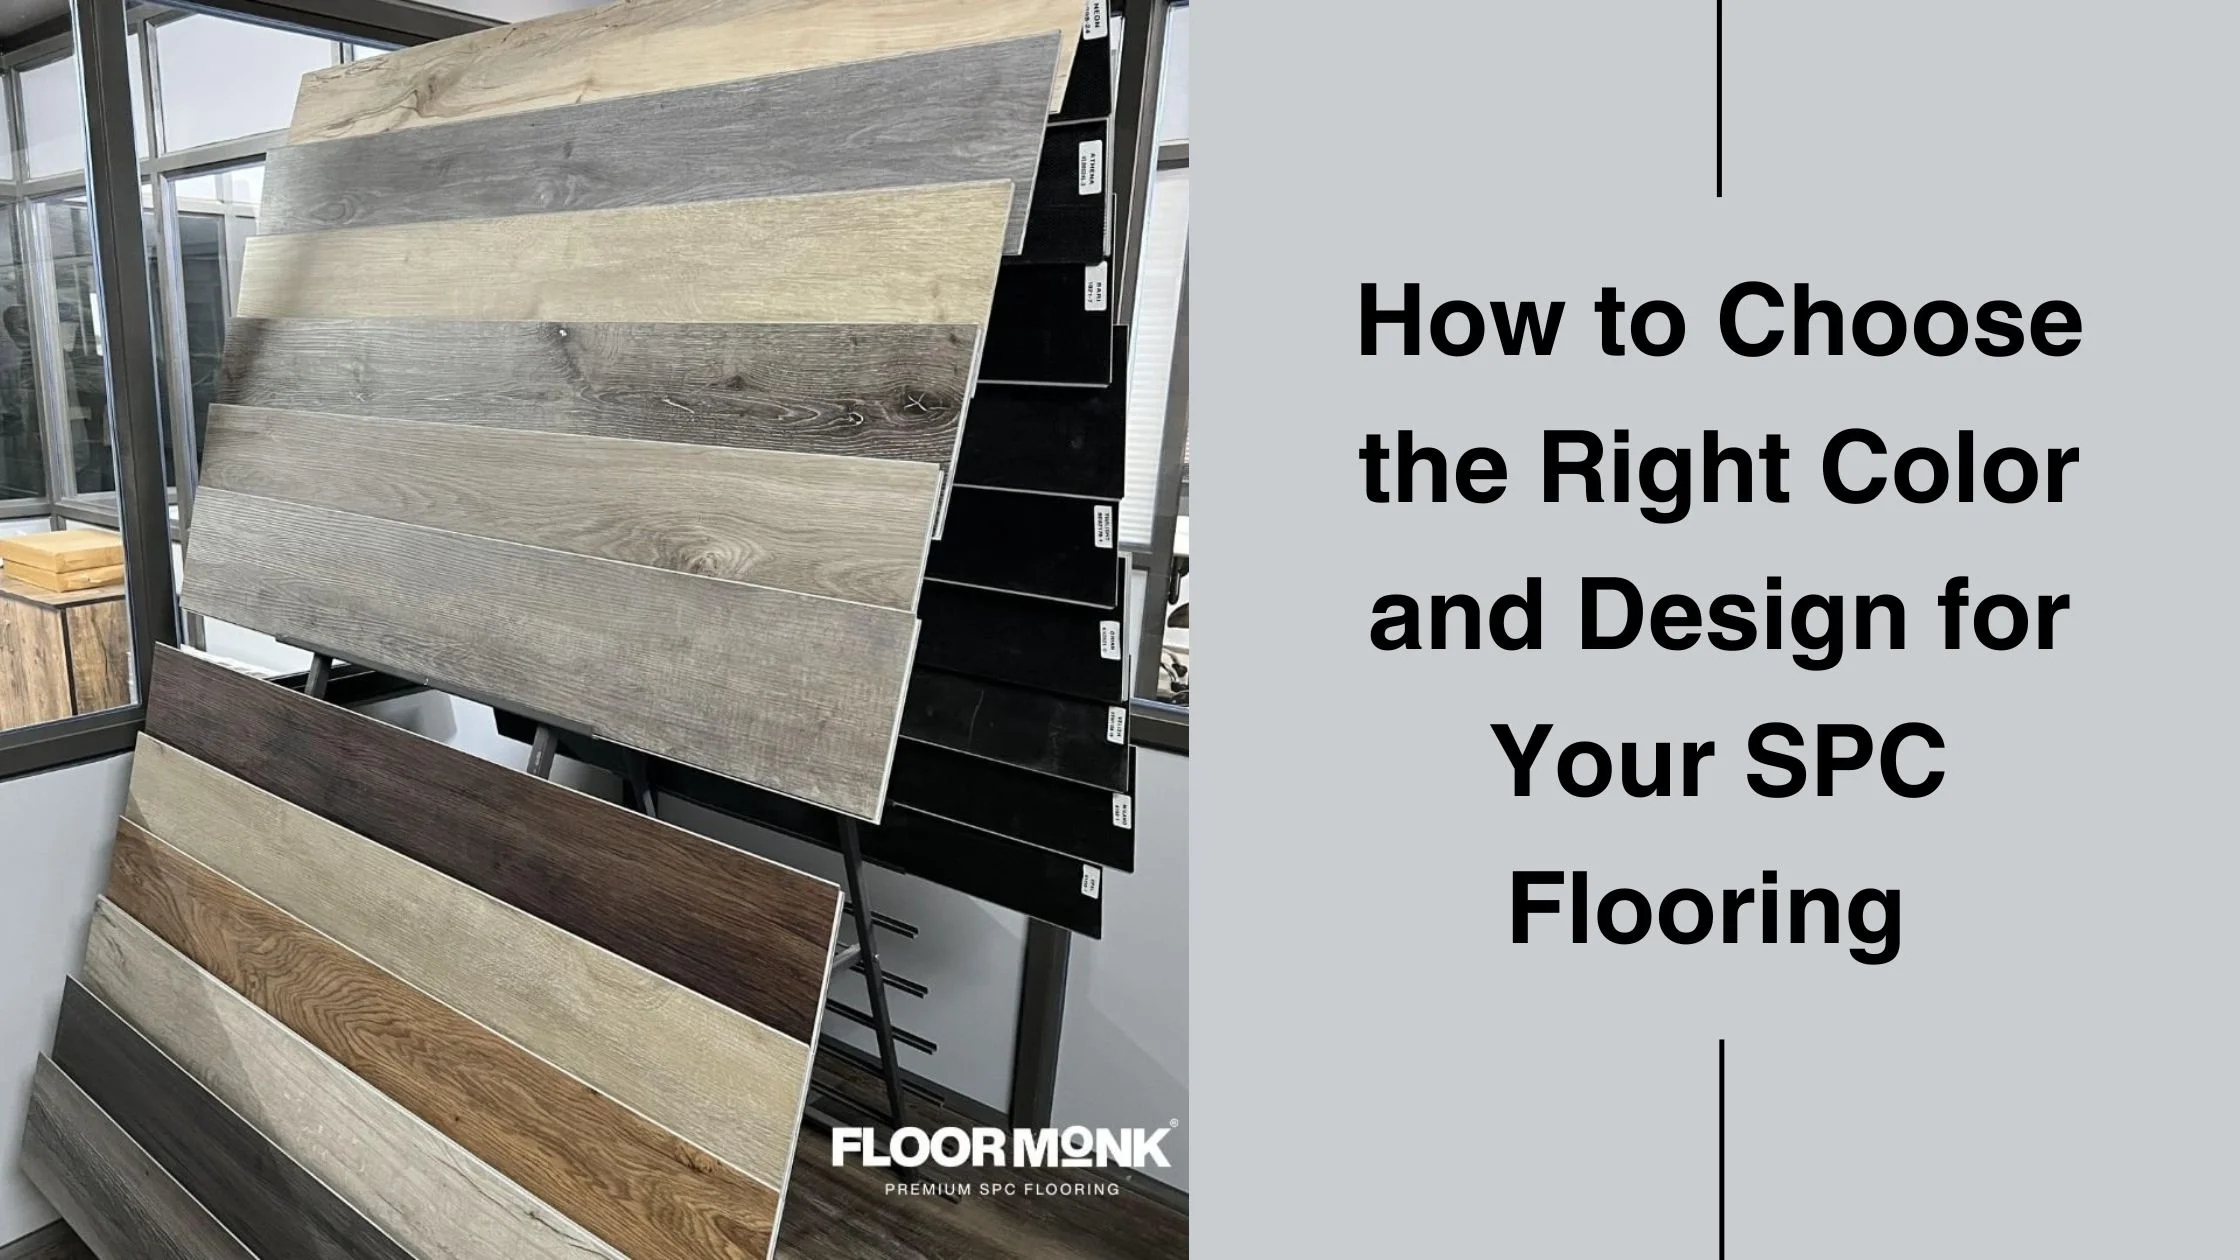 How To Choose The Right Color And Design For Your SPC Flooring?